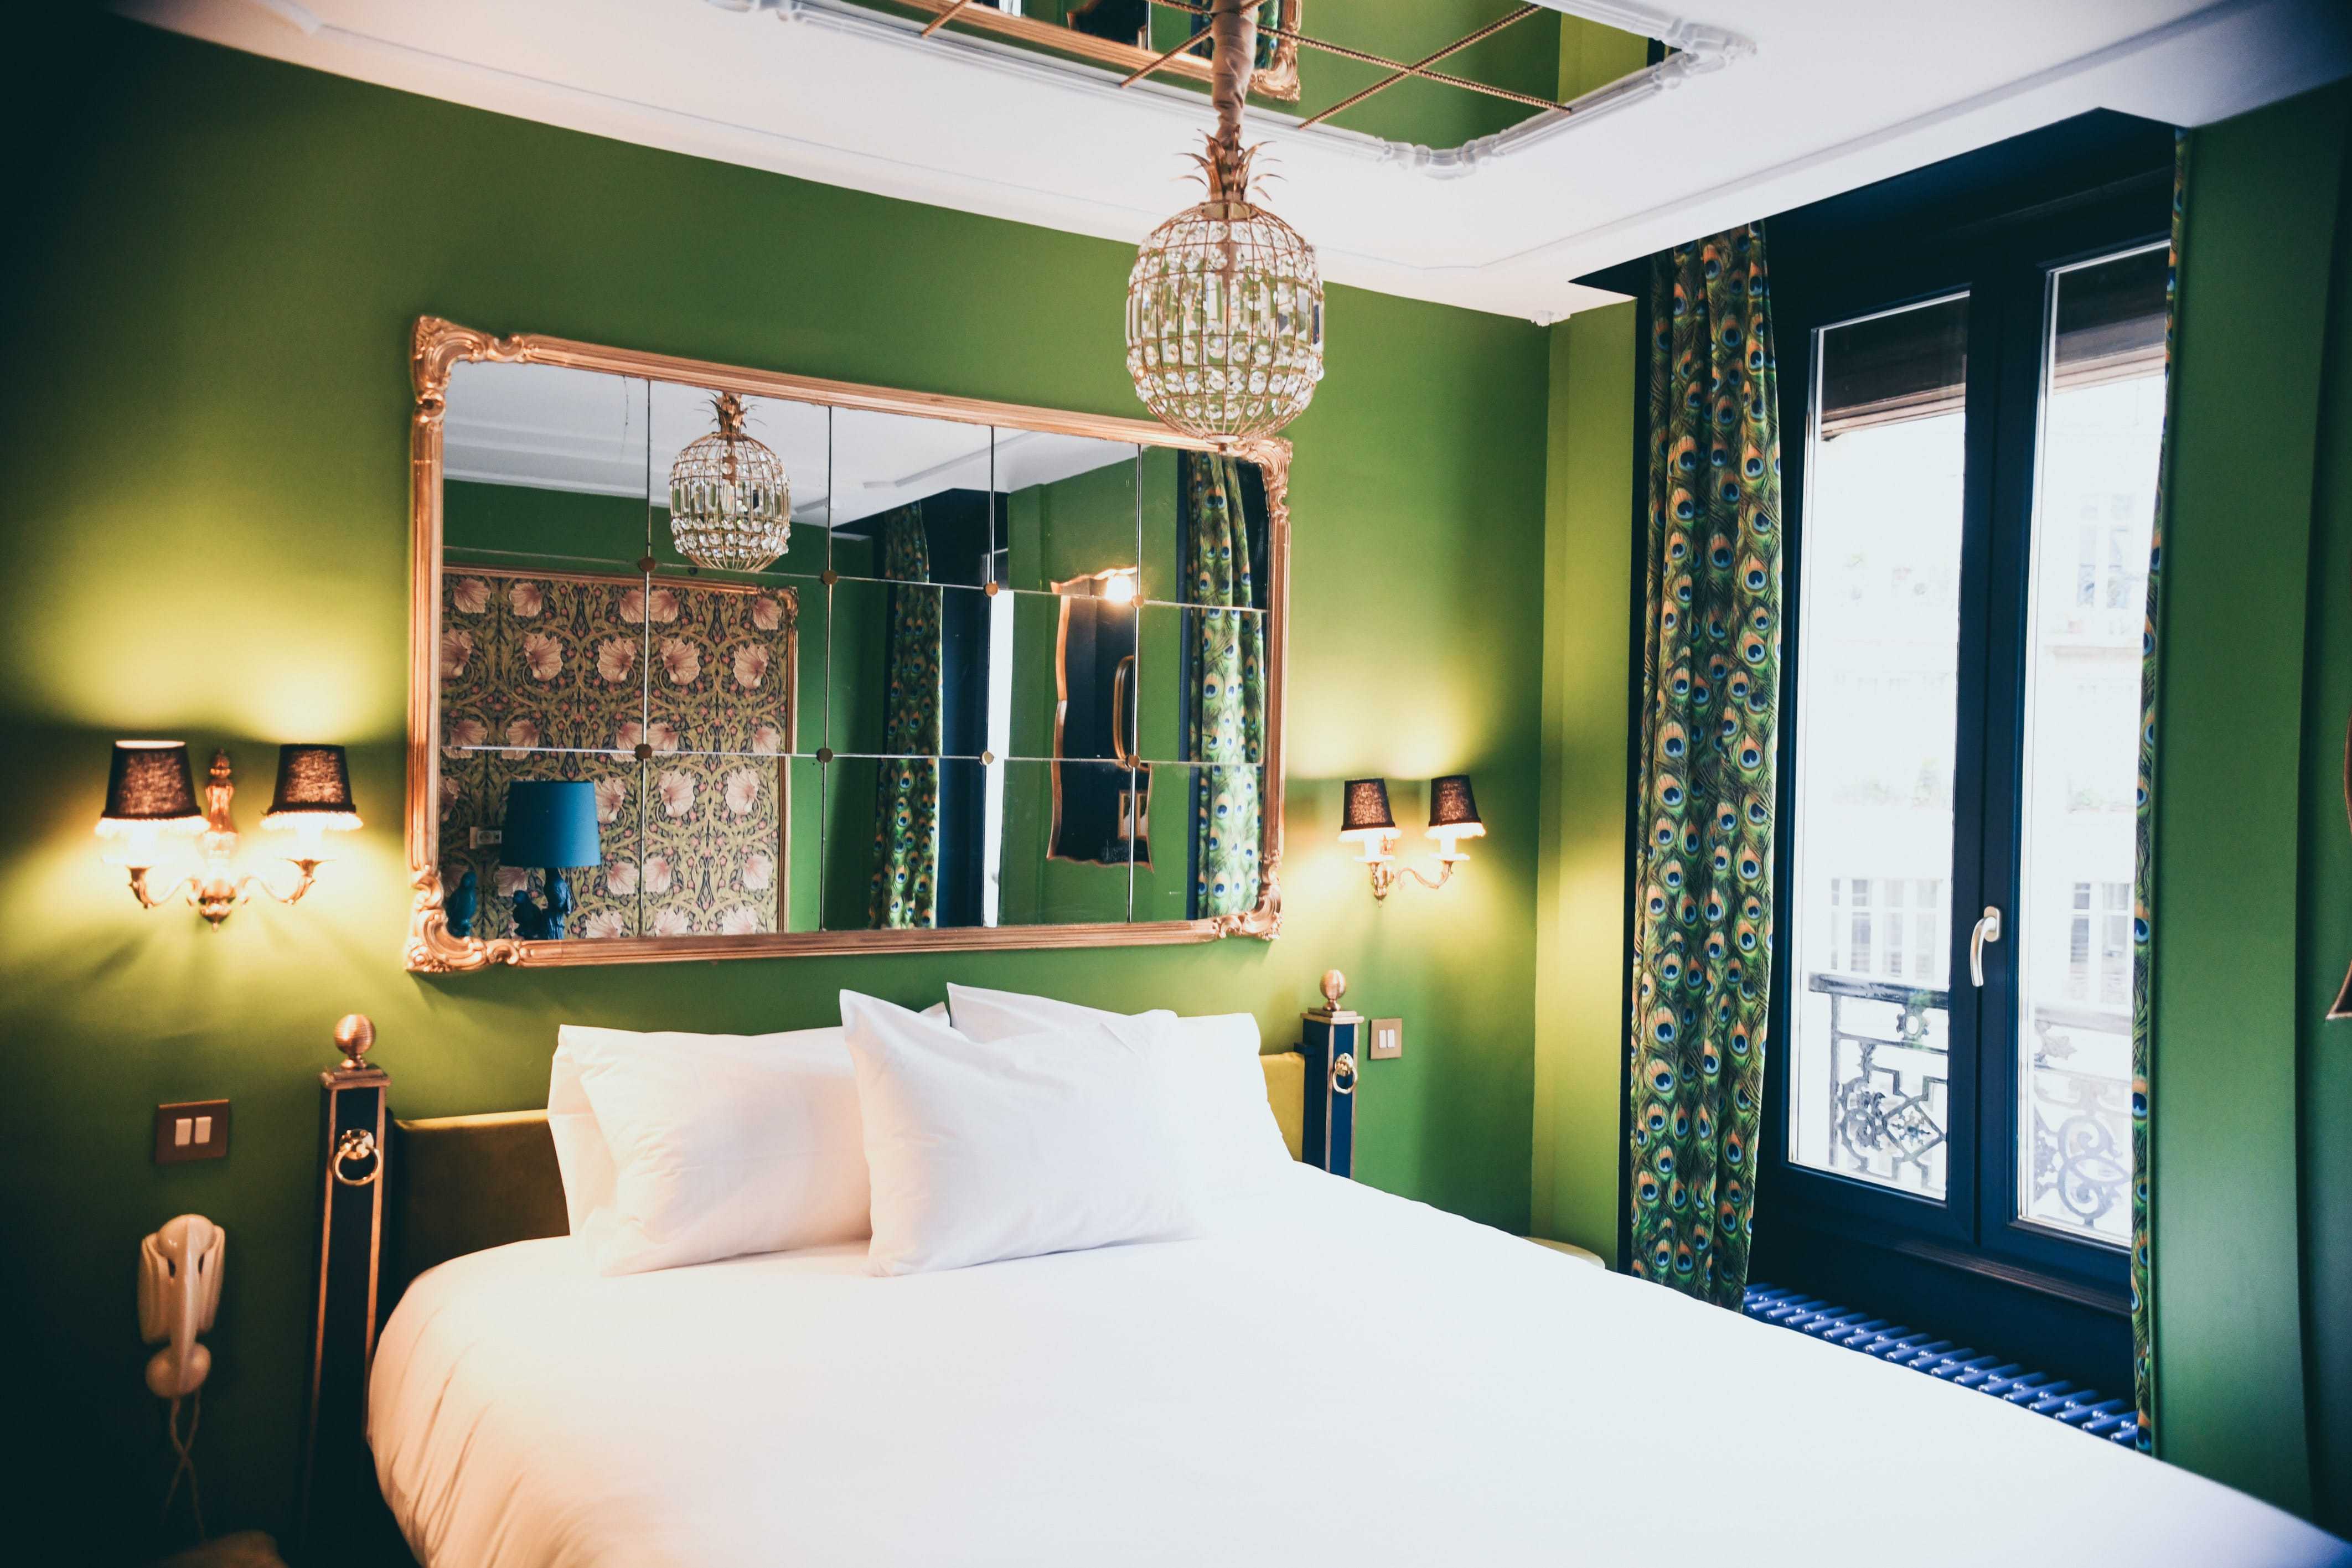 18 Different Types of Hotel Rooms